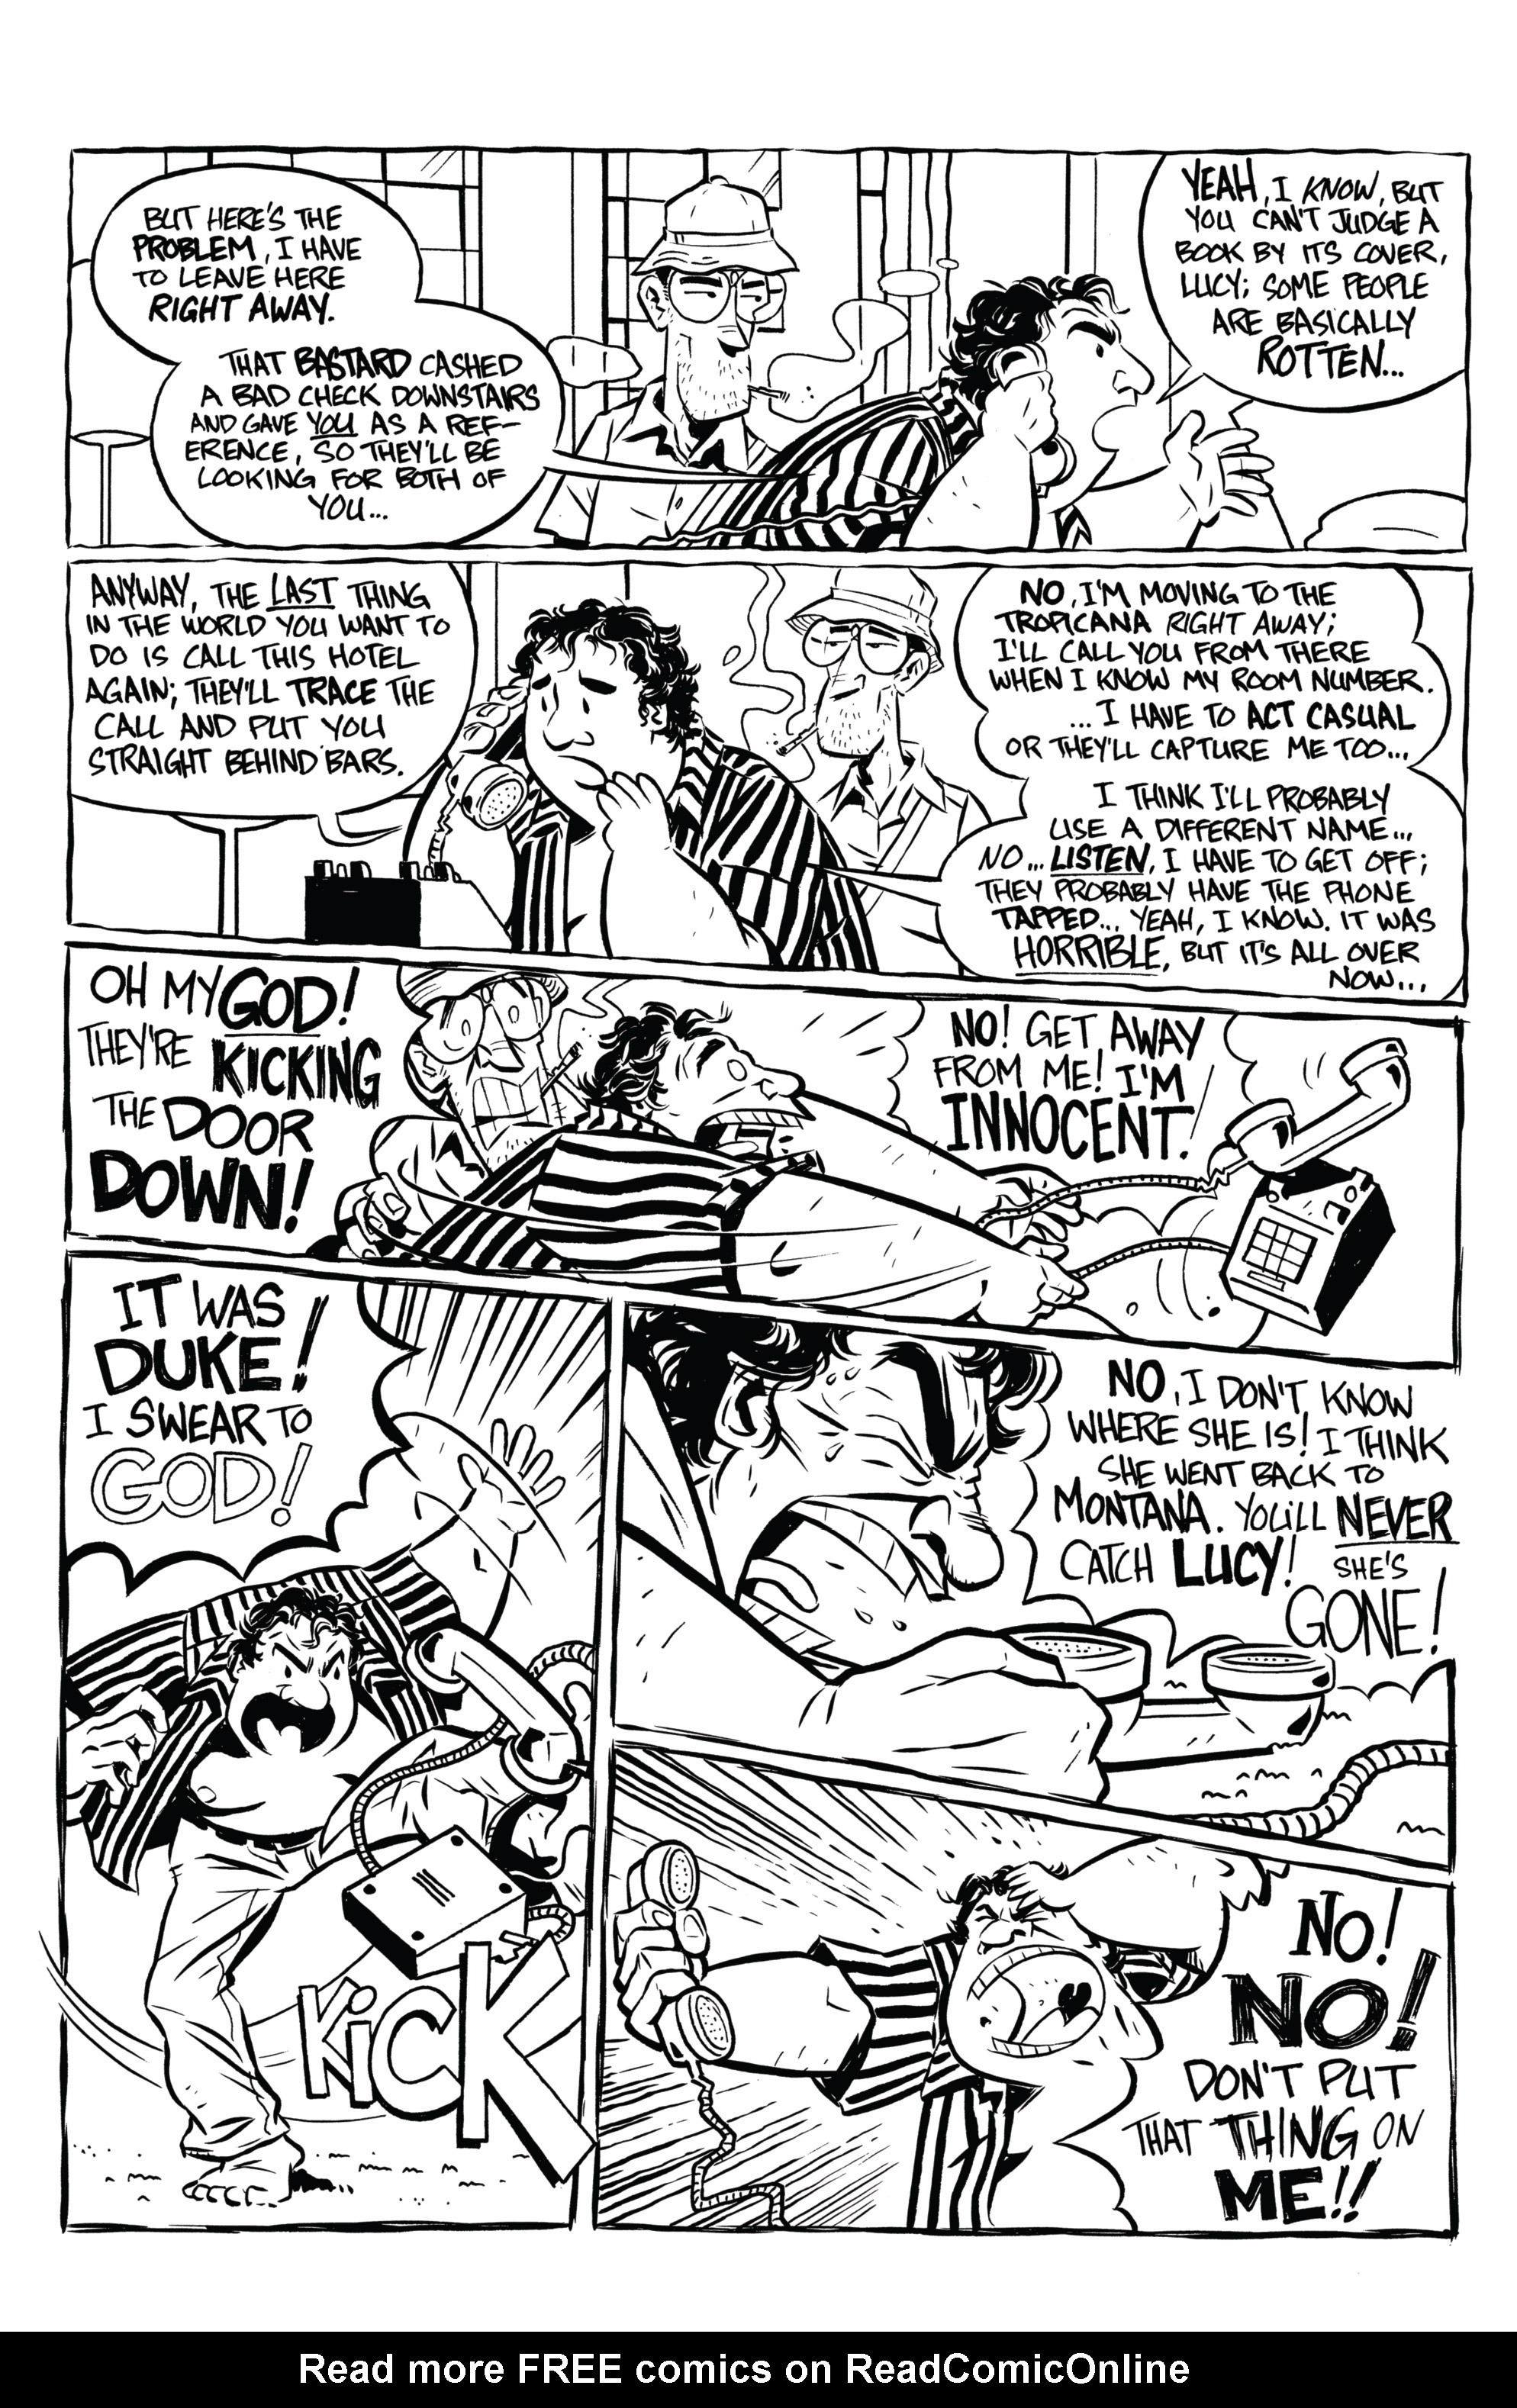 Read online Hunter S. Thompson's Fear and Loathing in Las Vegas comic -  Issue #3 - 34